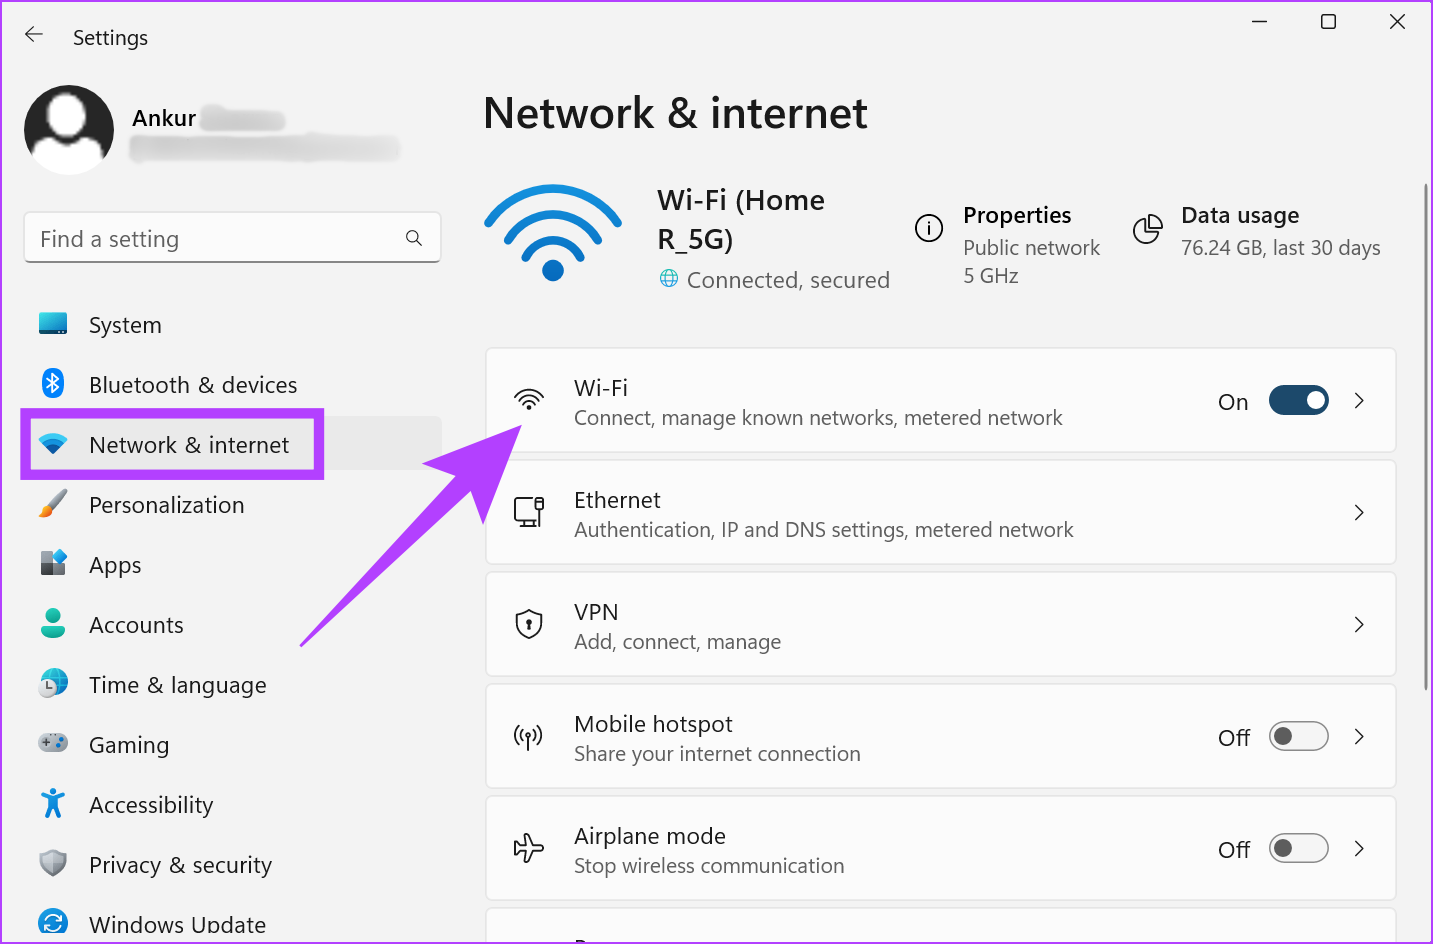 Open Network & internet and open Wi-Fi